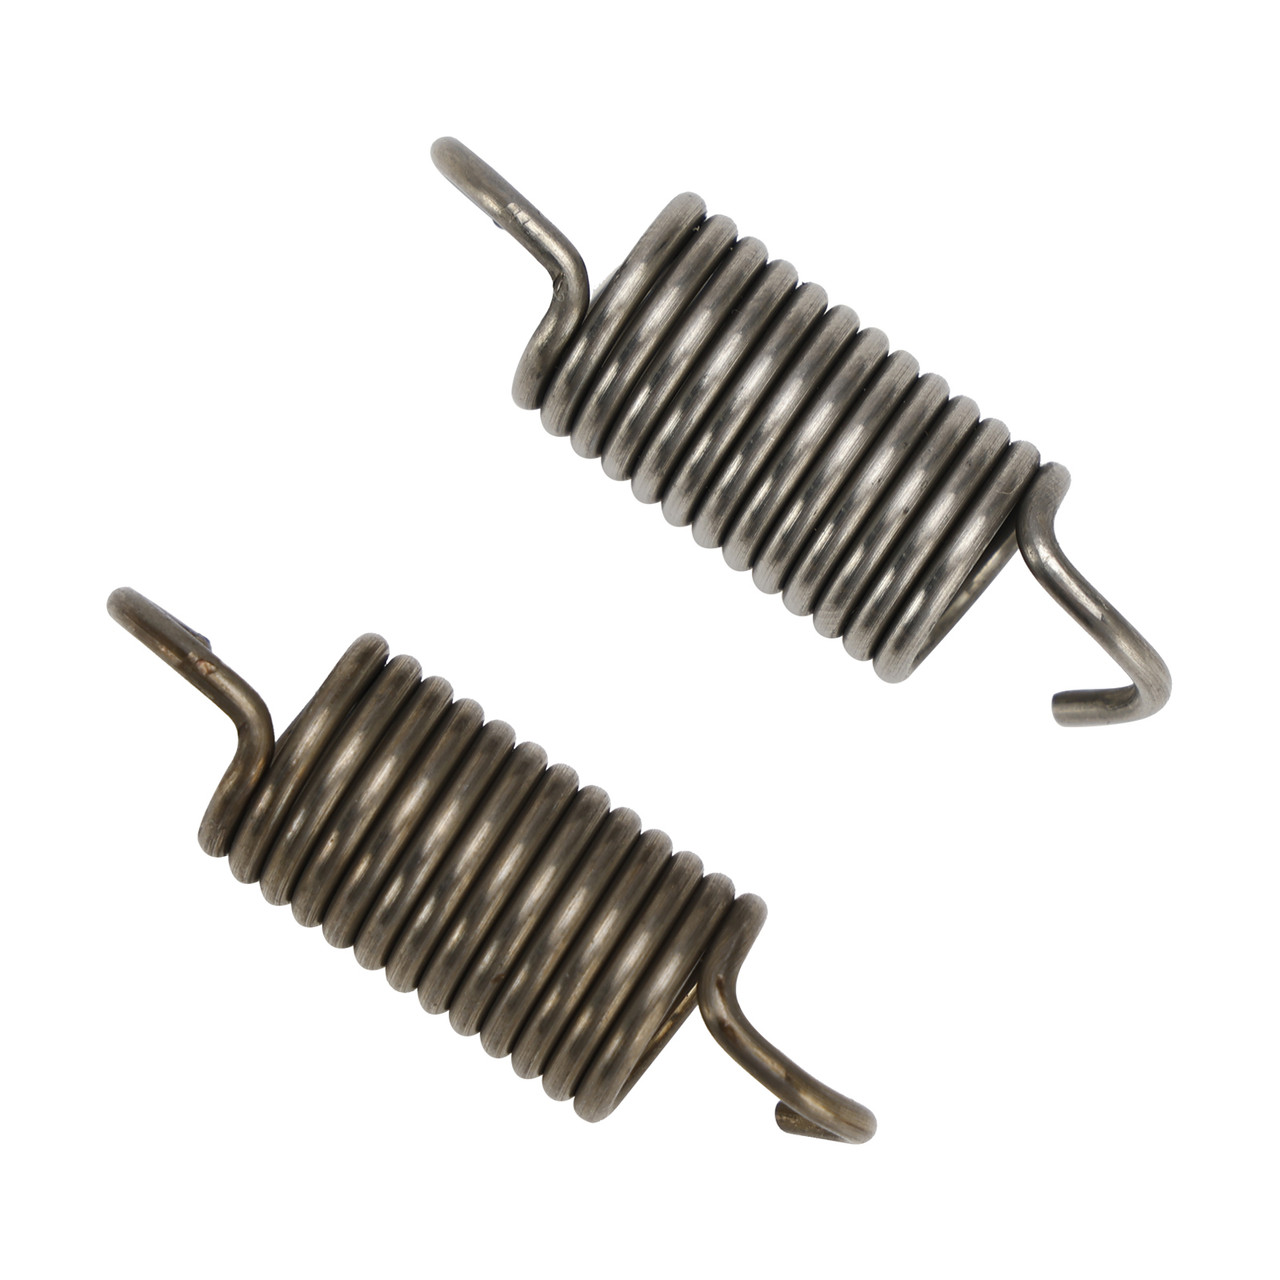 1981-2024 Yamaha Motorcycle PW50 Engine Clutch Weight Spring set 3L5-16627-02 Generic